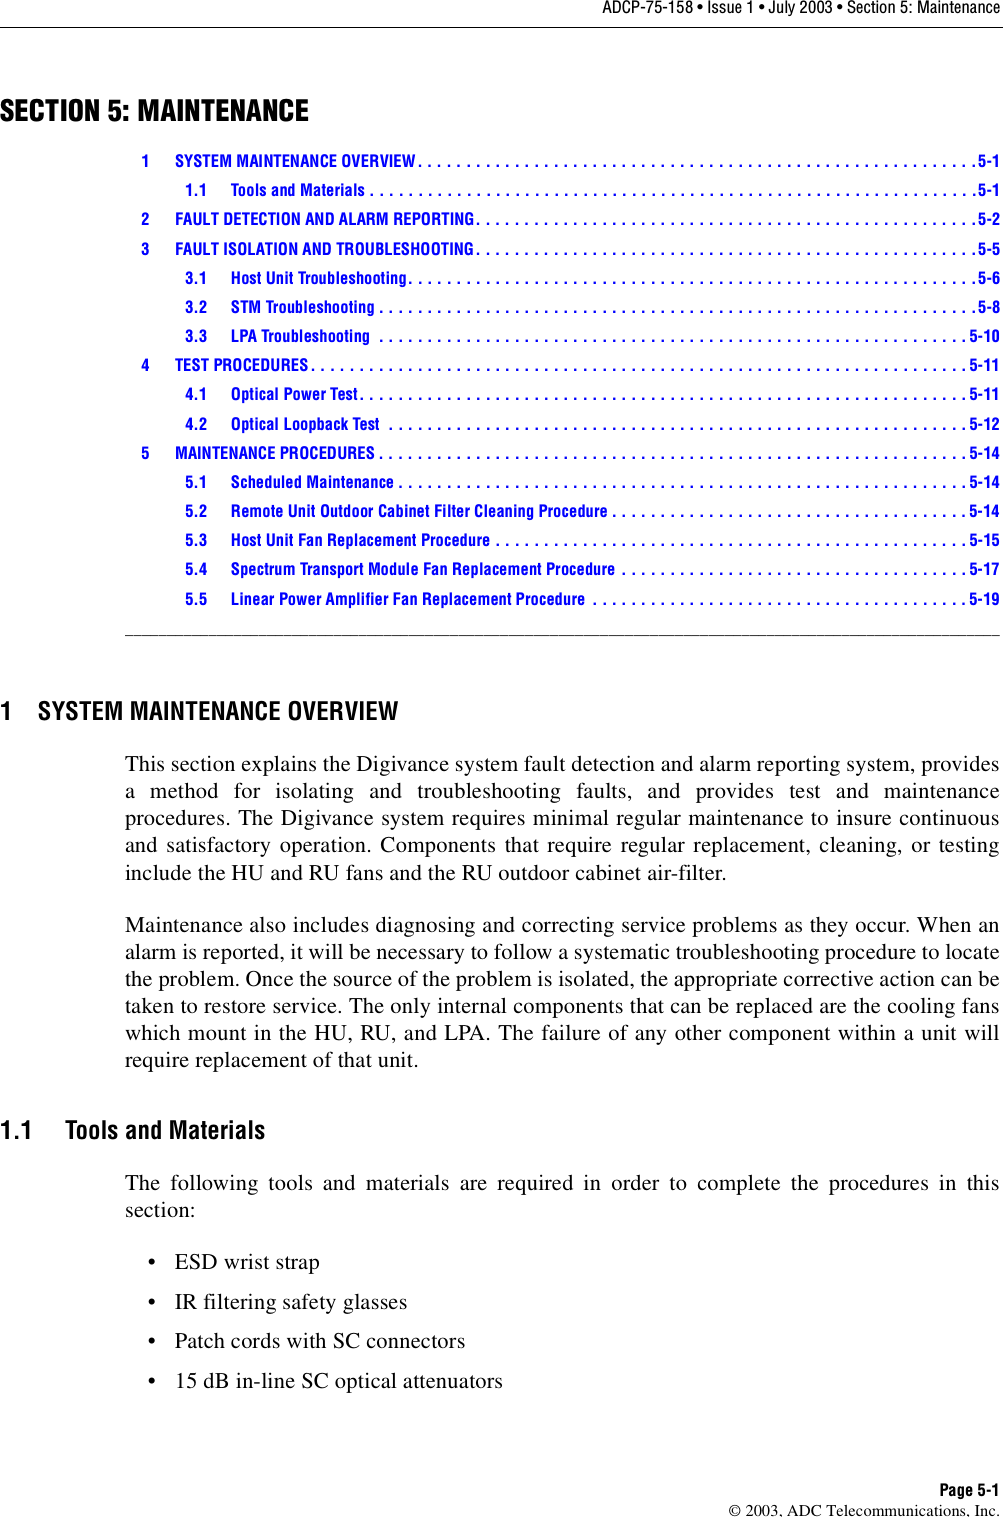 ADCP-75-158 • Issue 1 • July 2003 • Section 5: MaintenancePage 5-1© 2003, ADC Telecommunications, Inc.SECTION 5: MAINTENANCE1 SYSTEM MAINTENANCE OVERVIEW . . . . . . . . . . . . . . . . . . . . . . . . . . . . . . . . . . . . . . . . . . . . . . . . . . . . . . . . . .5-11.1 Tools and Materials . . . . . . . . . . . . . . . . . . . . . . . . . . . . . . . . . . . . . . . . . . . . . . . . . . . . . . . . . . . . . . .5-12 FAULT DETECTION AND ALARM REPORTING. . . . . . . . . . . . . . . . . . . . . . . . . . . . . . . . . . . . . . . . . . . . . . . . . . . .5-23 FAULT ISOLATION AND TROUBLESHOOTING. . . . . . . . . . . . . . . . . . . . . . . . . . . . . . . . . . . . . . . . . . . . . . . . . . . .5-53.1 Host Unit Troubleshooting. . . . . . . . . . . . . . . . . . . . . . . . . . . . . . . . . . . . . . . . . . . . . . . . . . . . . . . . . . .5-63.2 STM Troubleshooting . . . . . . . . . . . . . . . . . . . . . . . . . . . . . . . . . . . . . . . . . . . . . . . . . . . . . . . . . . . . . .5-83.3 LPA Troubleshooting  . . . . . . . . . . . . . . . . . . . . . . . . . . . . . . . . . . . . . . . . . . . . . . . . . . . . . . . . . . . . . 5-104 TEST PROCEDURES . . . . . . . . . . . . . . . . . . . . . . . . . . . . . . . . . . . . . . . . . . . . . . . . . . . . . . . . . . . . . . . . . . . . 5-114.1 Optical Power Test. . . . . . . . . . . . . . . . . . . . . . . . . . . . . . . . . . . . . . . . . . . . . . . . . . . . . . . . . . . . . . . 5-114.2 Optical Loopback Test  . . . . . . . . . . . . . . . . . . . . . . . . . . . . . . . . . . . . . . . . . . . . . . . . . . . . . . . . . . . . 5-125 MAINTENANCE PROCEDURES . . . . . . . . . . . . . . . . . . . . . . . . . . . . . . . . . . . . . . . . . . . . . . . . . . . . . . . . . . . . . 5-145.1 Scheduled Maintenance . . . . . . . . . . . . . . . . . . . . . . . . . . . . . . . . . . . . . . . . . . . . . . . . . . . . . . . . . . . 5-145.2 Remote Unit Outdoor Cabinet Filter Cleaning Procedure . . . . . . . . . . . . . . . . . . . . . . . . . . . . . . . . . . . . .5-145.3 Host Unit Fan Replacement Procedure . . . . . . . . . . . . . . . . . . . . . . . . . . . . . . . . . . . . . . . . . . . . . . . . . 5-155.4 Spectrum Transport Module Fan Replacement Procedure  . . . . . . . . . . . . . . . . . . . . . . . . . . . . . . . . . . . . 5-175.5 Linear Power Amplifier Fan Replacement Procedure  . . . . . . . . . . . . . . . . . . . . . . . . . . . . . . . . . . . . . . .5-19_________________________________________________________________________________________________________1 SYSTEM MAINTENANCE OVERVIEWThis section explains the Digivance system fault detection and alarm reporting system, providesa method for isolating and troubleshooting faults, and provides test and maintenanceprocedures. The Digivance system requires minimal regular maintenance to insure continuousand satisfactory operation. Components that require regular replacement, cleaning, or testinginclude the HU and RU fans and the RU outdoor cabinet air-filter.Maintenance also includes diagnosing and correcting service problems as they occur. When analarm is reported, it will be necessary to follow a systematic troubleshooting procedure to locatethe problem. Once the source of the problem is isolated, the appropriate corrective action can betaken to restore service. The only internal components that can be replaced are the cooling fanswhich mount in the HU, RU, and LPA. The failure of any other component within a unit willrequire replacement of that unit. 1.1 Tools and MaterialsThe following tools and materials are required in order to complete the procedures in thissection: •ESD wrist strap• IR filtering safety glasses• Patch cords with SC connectors• 15 dB in-line SC optical attenuators